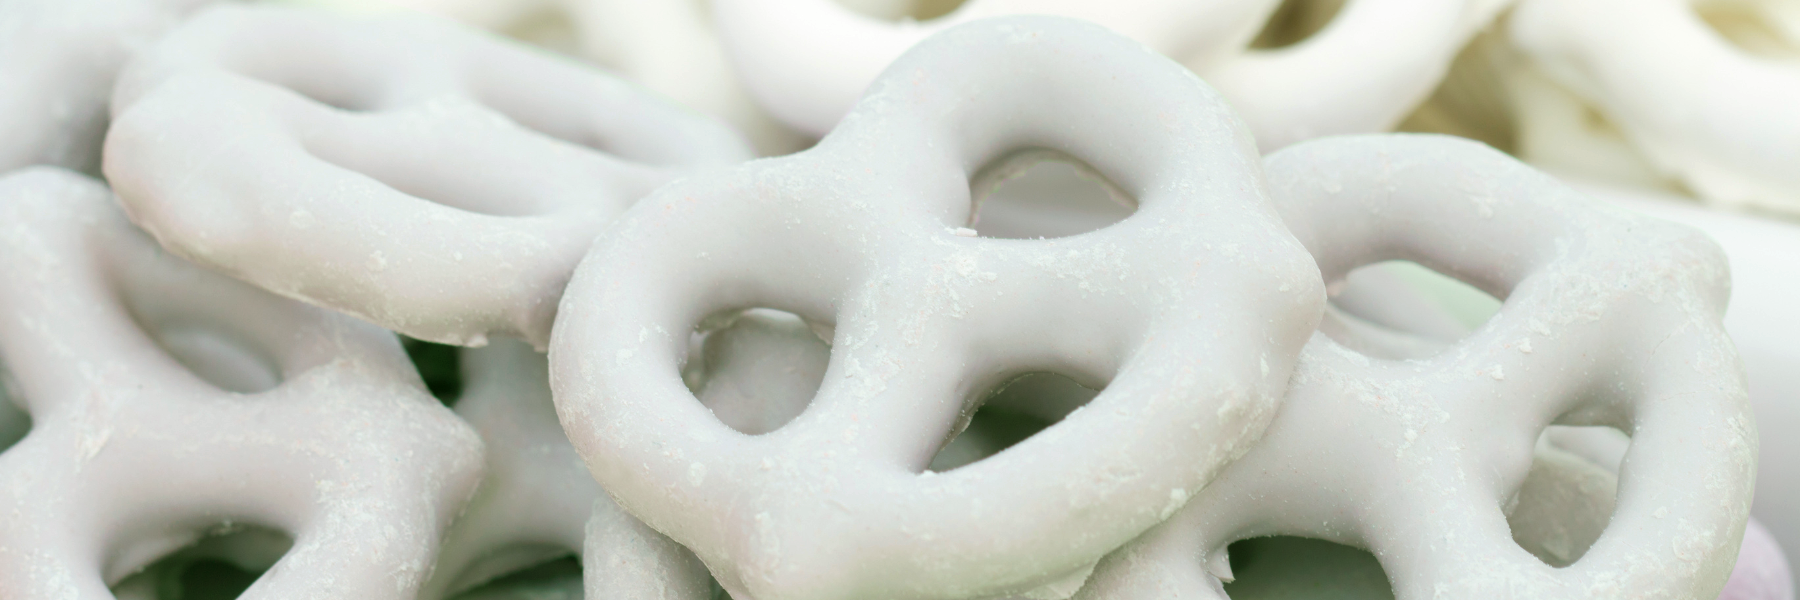 Pile of white peppermint pretzels by Dilettante Chocolates